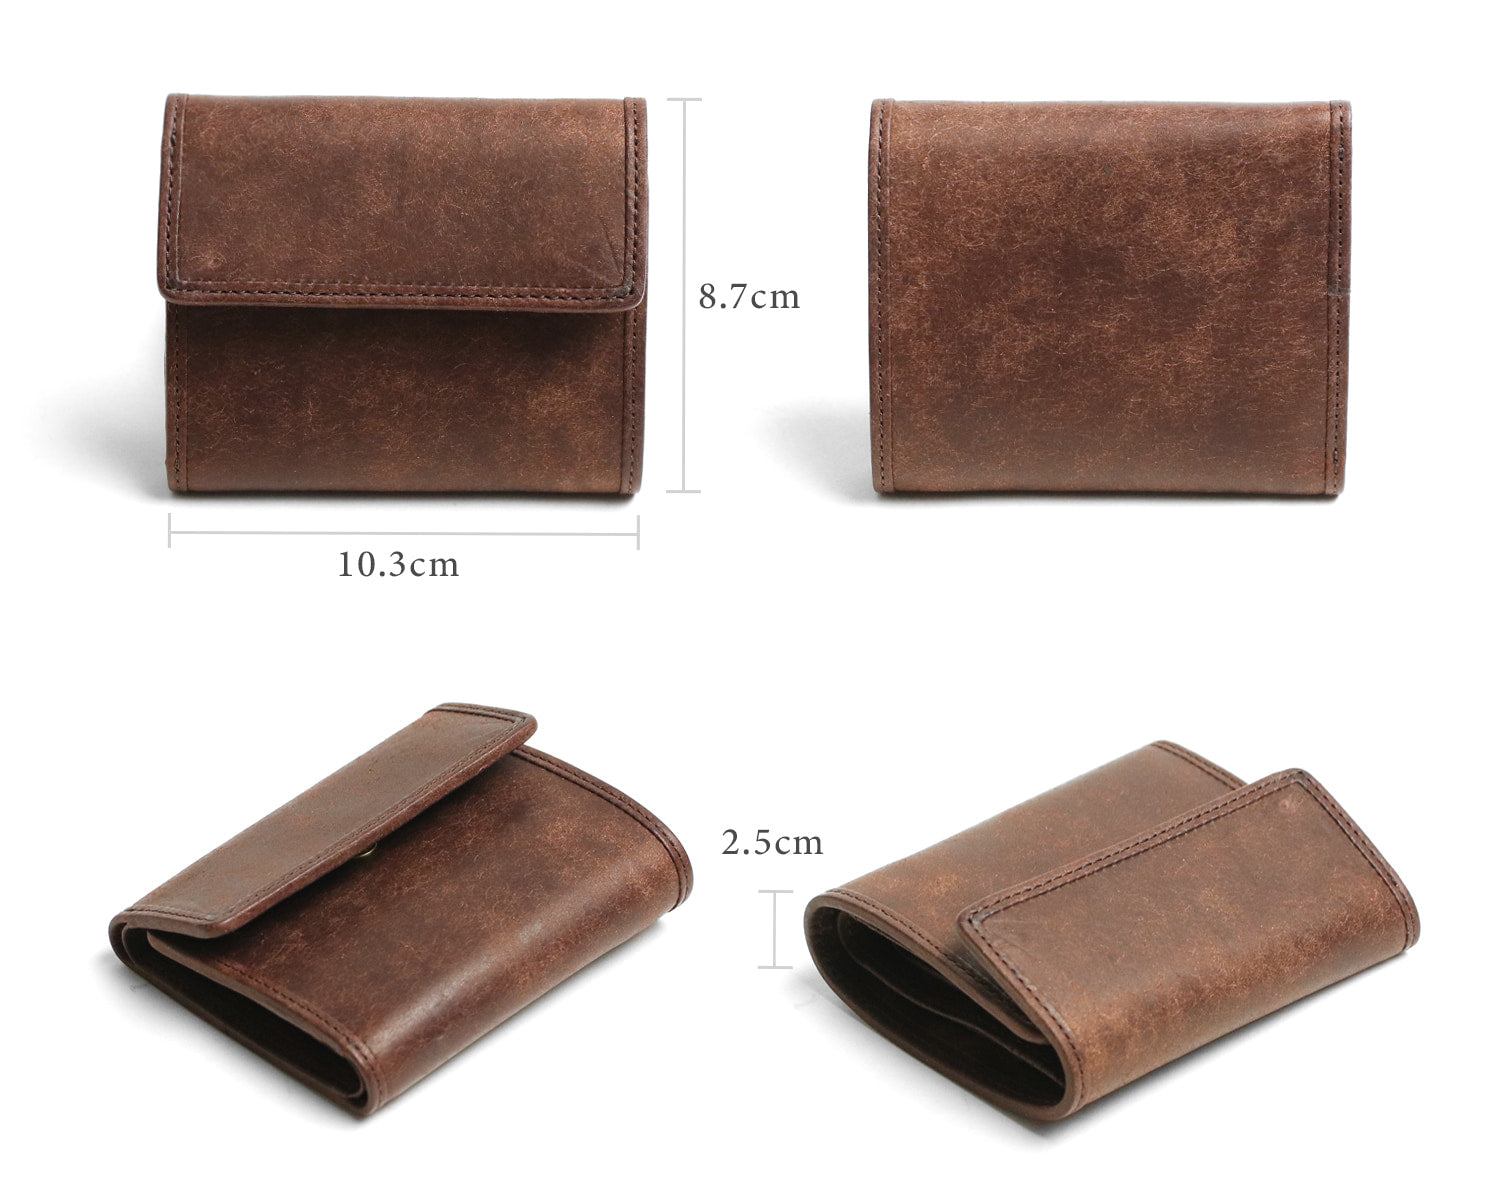 sot / Pueblo Leather Enjoy the unique aging effect. A compact wallet that stands out with its unique Italian leather charm. 